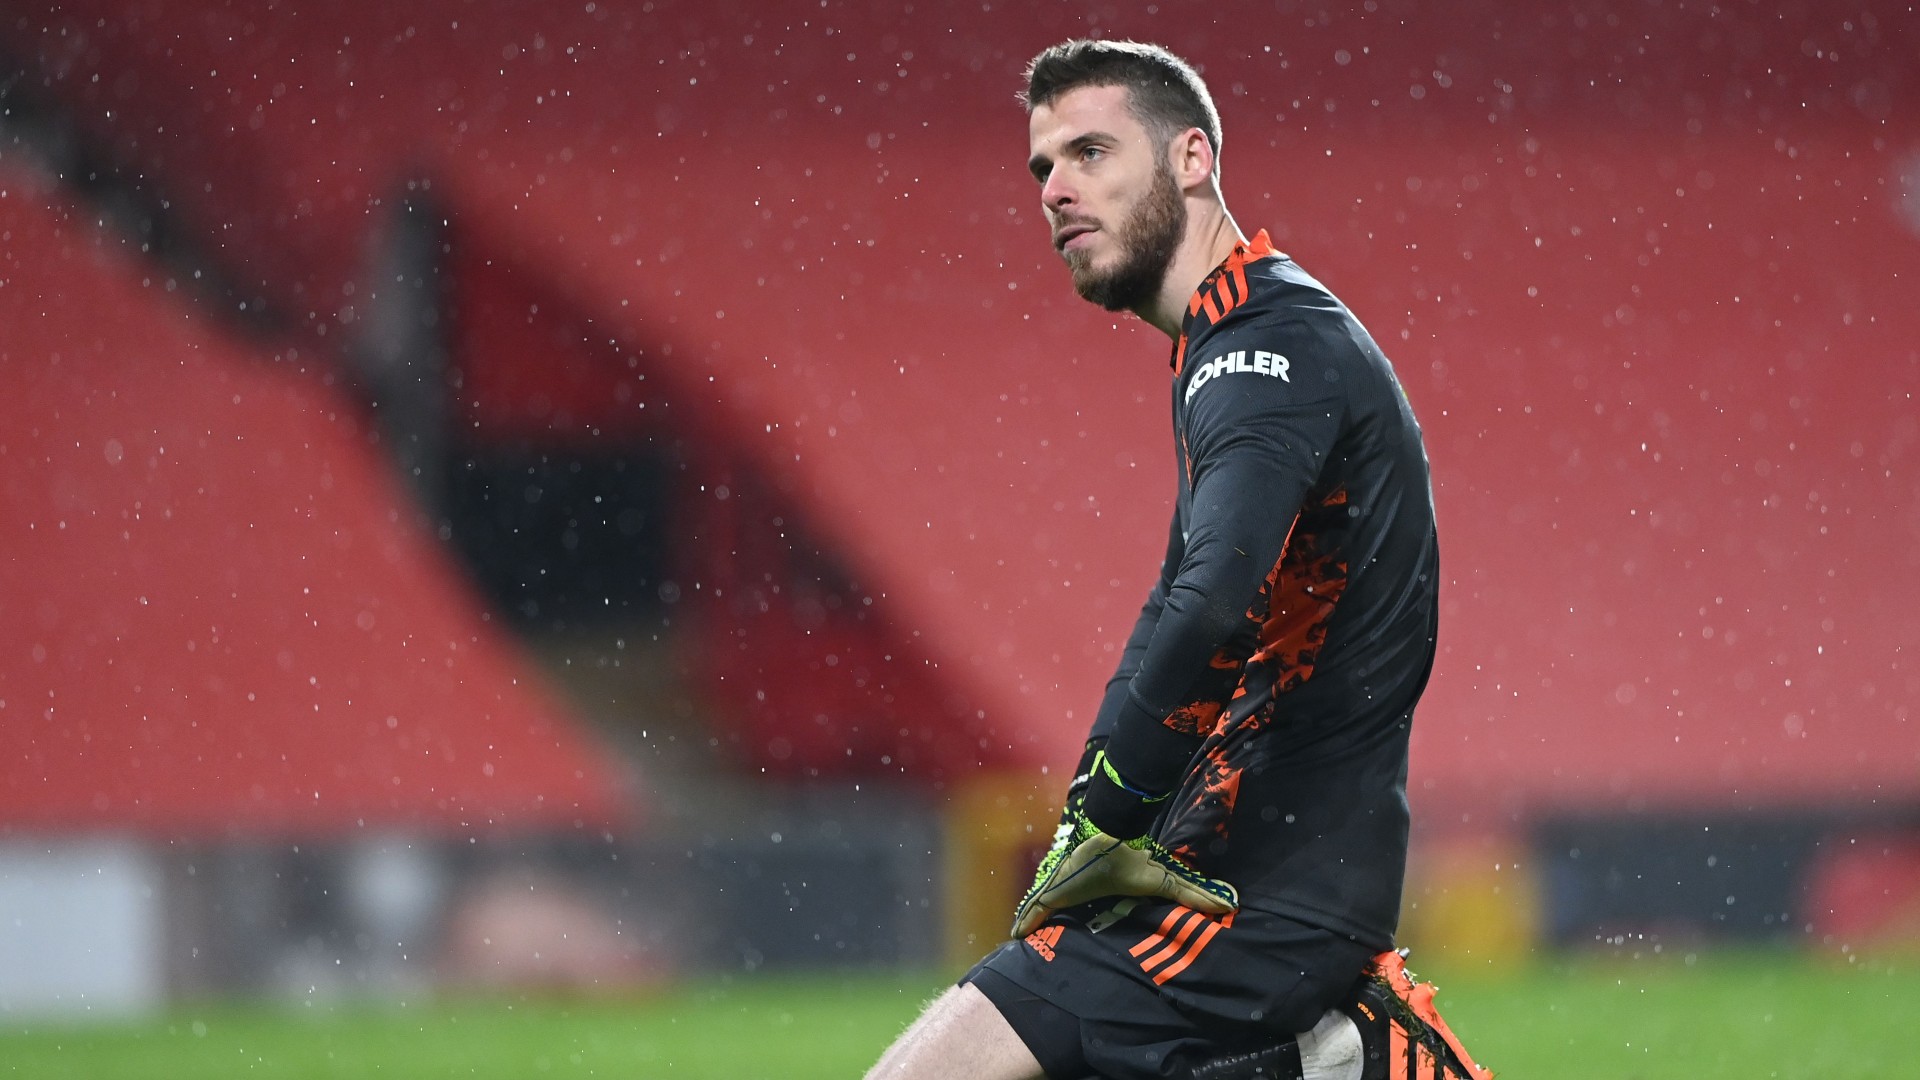 De Gea is lacking 'courage' and Man Utd don't believe they can challenge City, says Keane